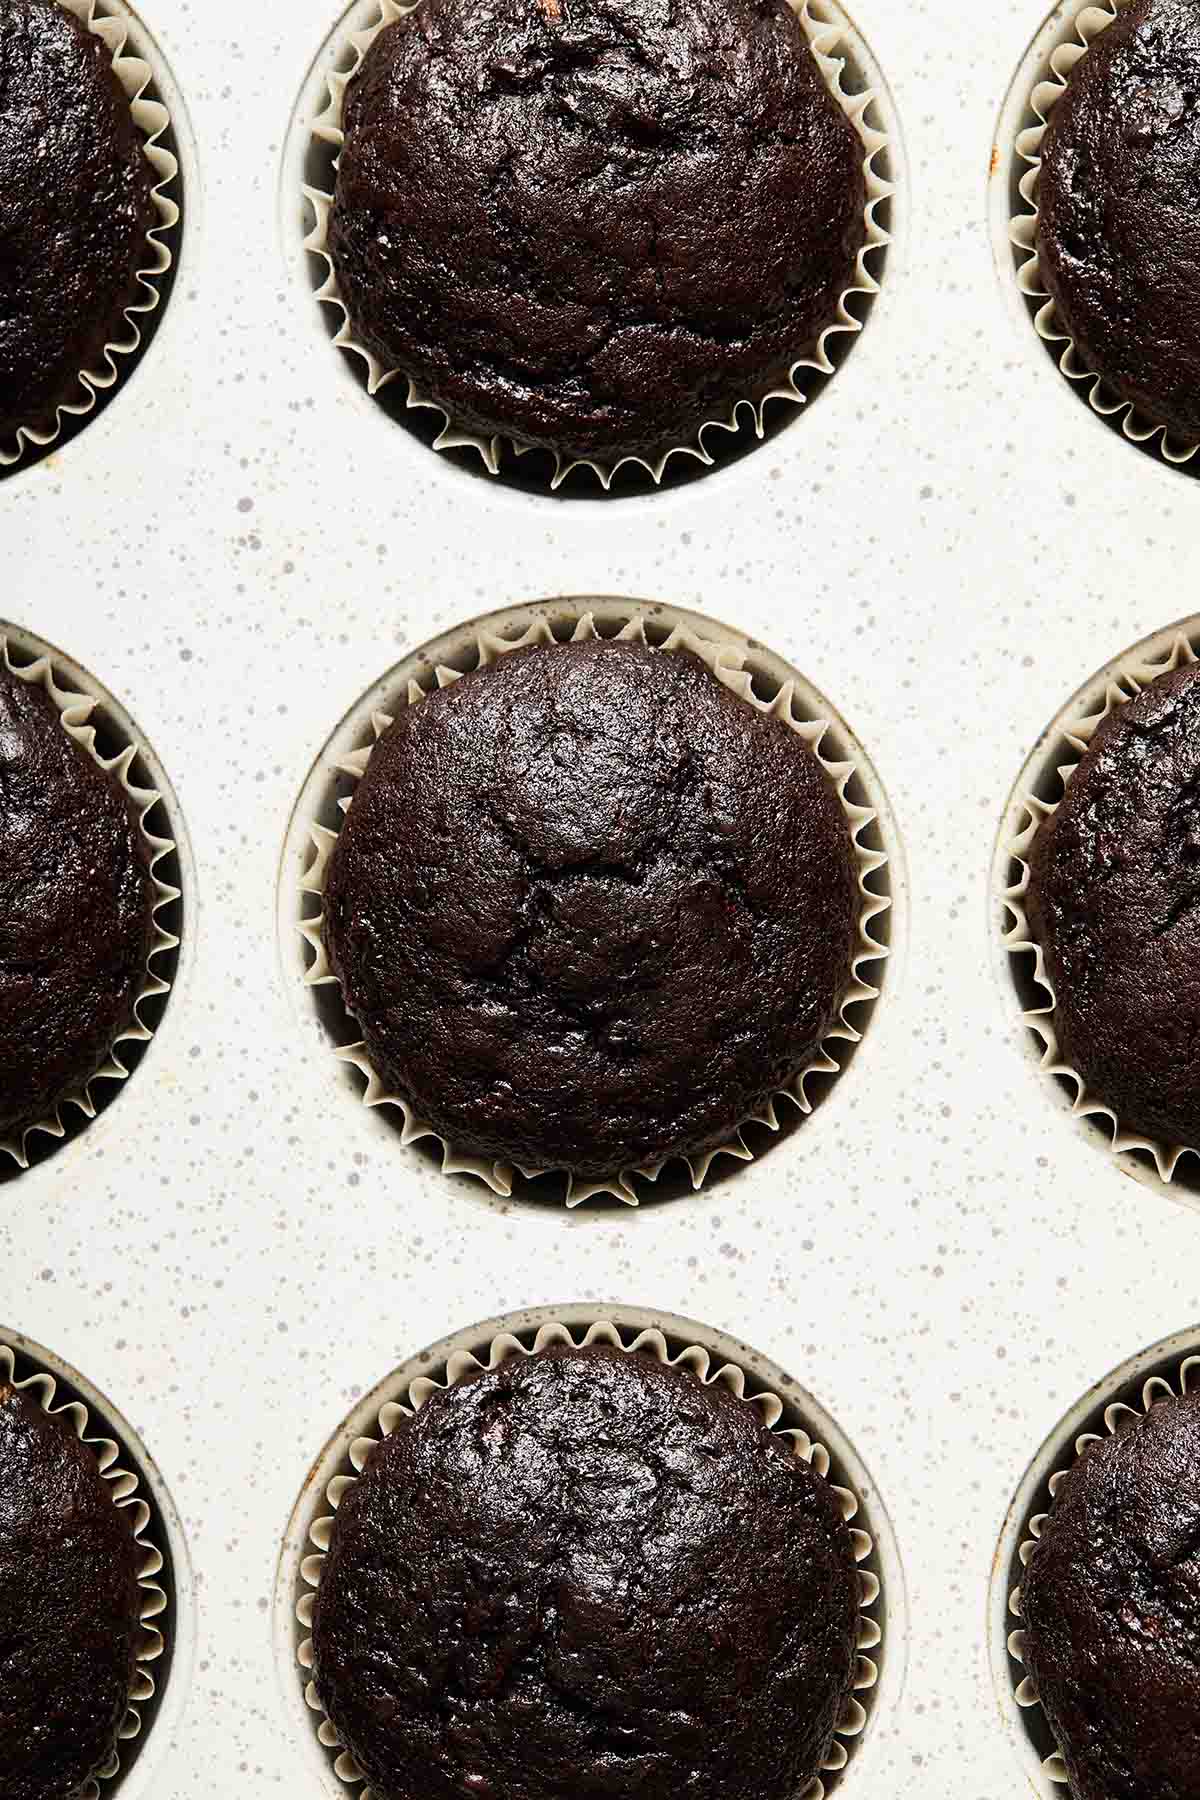 Cupcakes baked up in a muffin pan.